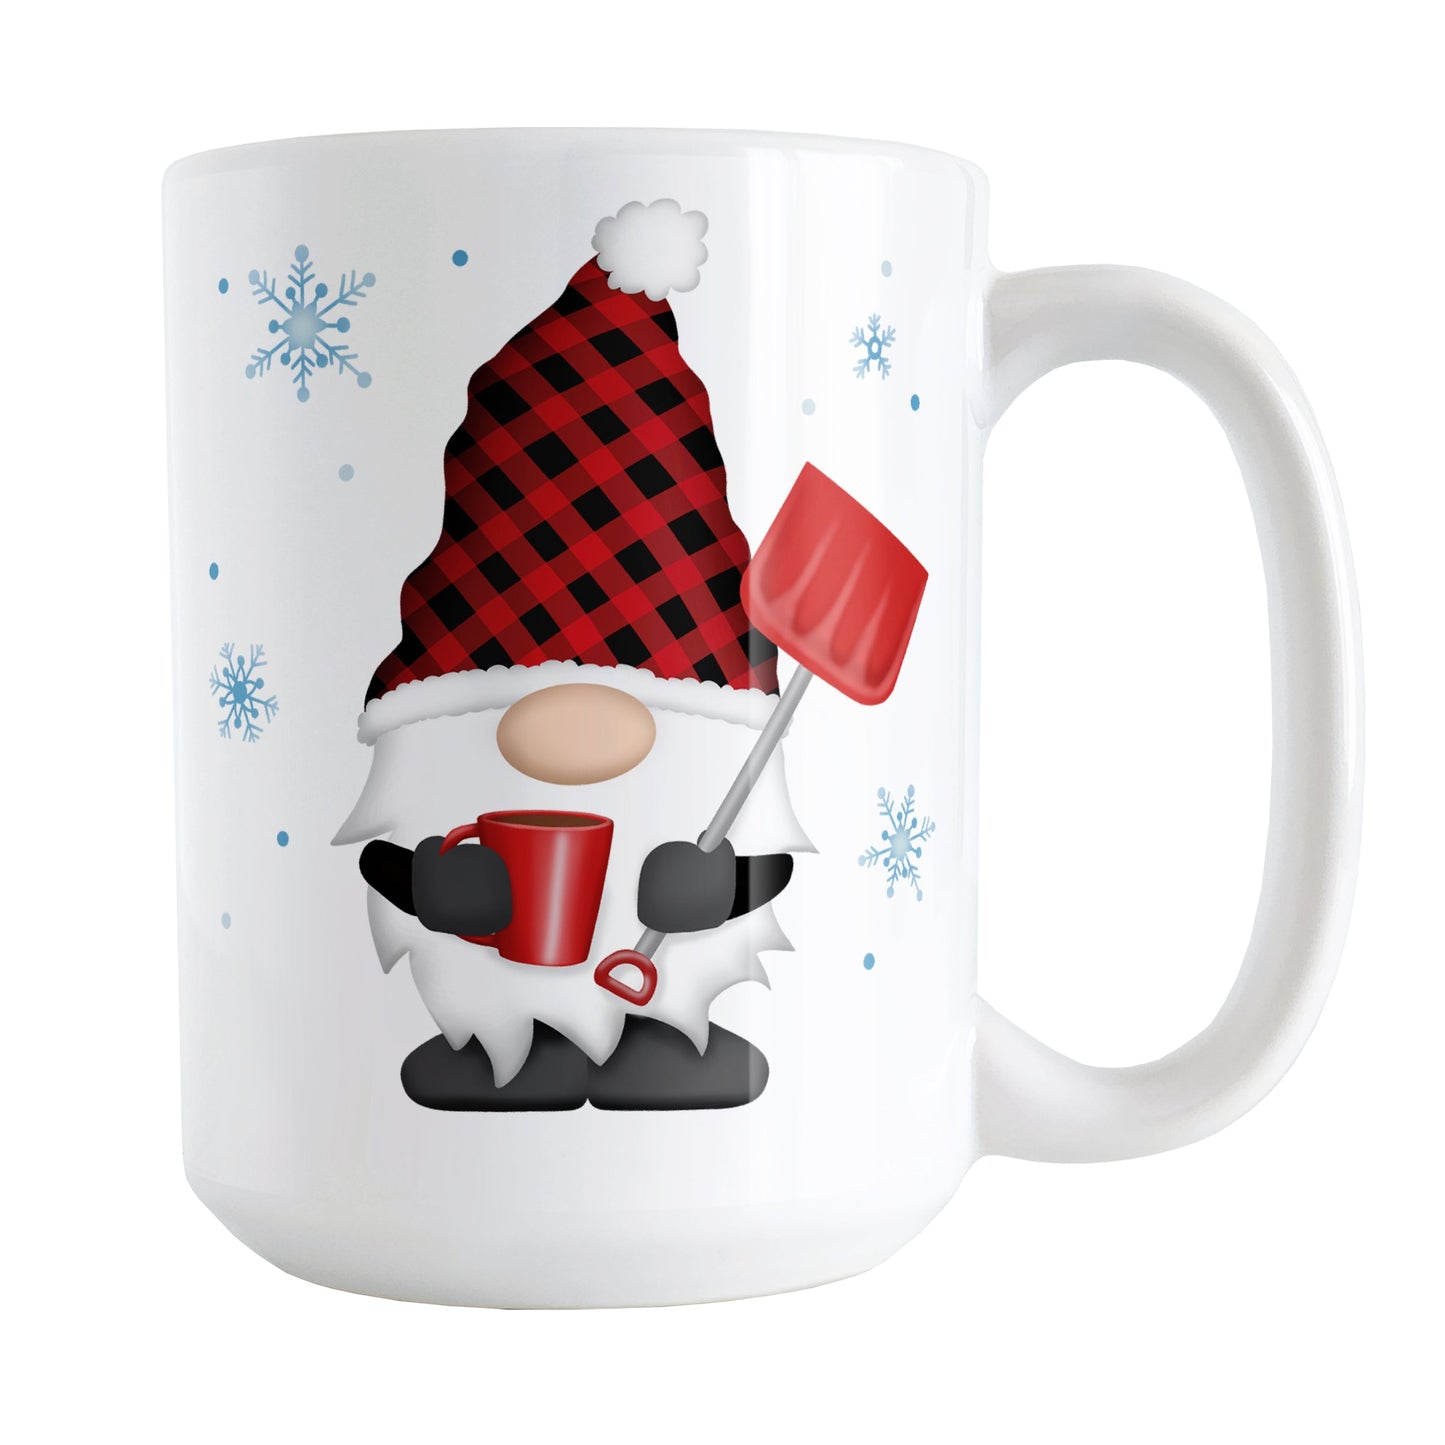 Red Buffalo Plaid Gnome Mug (15oz) at Amy's Coffee Mugs. A ceramic coffee mug designed with a gnome with a red and black buffalo plaid pattern hat and holding a hot beverage and snow shovel with snowflakes around it. This cute buffalo plaid gnome illustration is on both sides of the mug. 